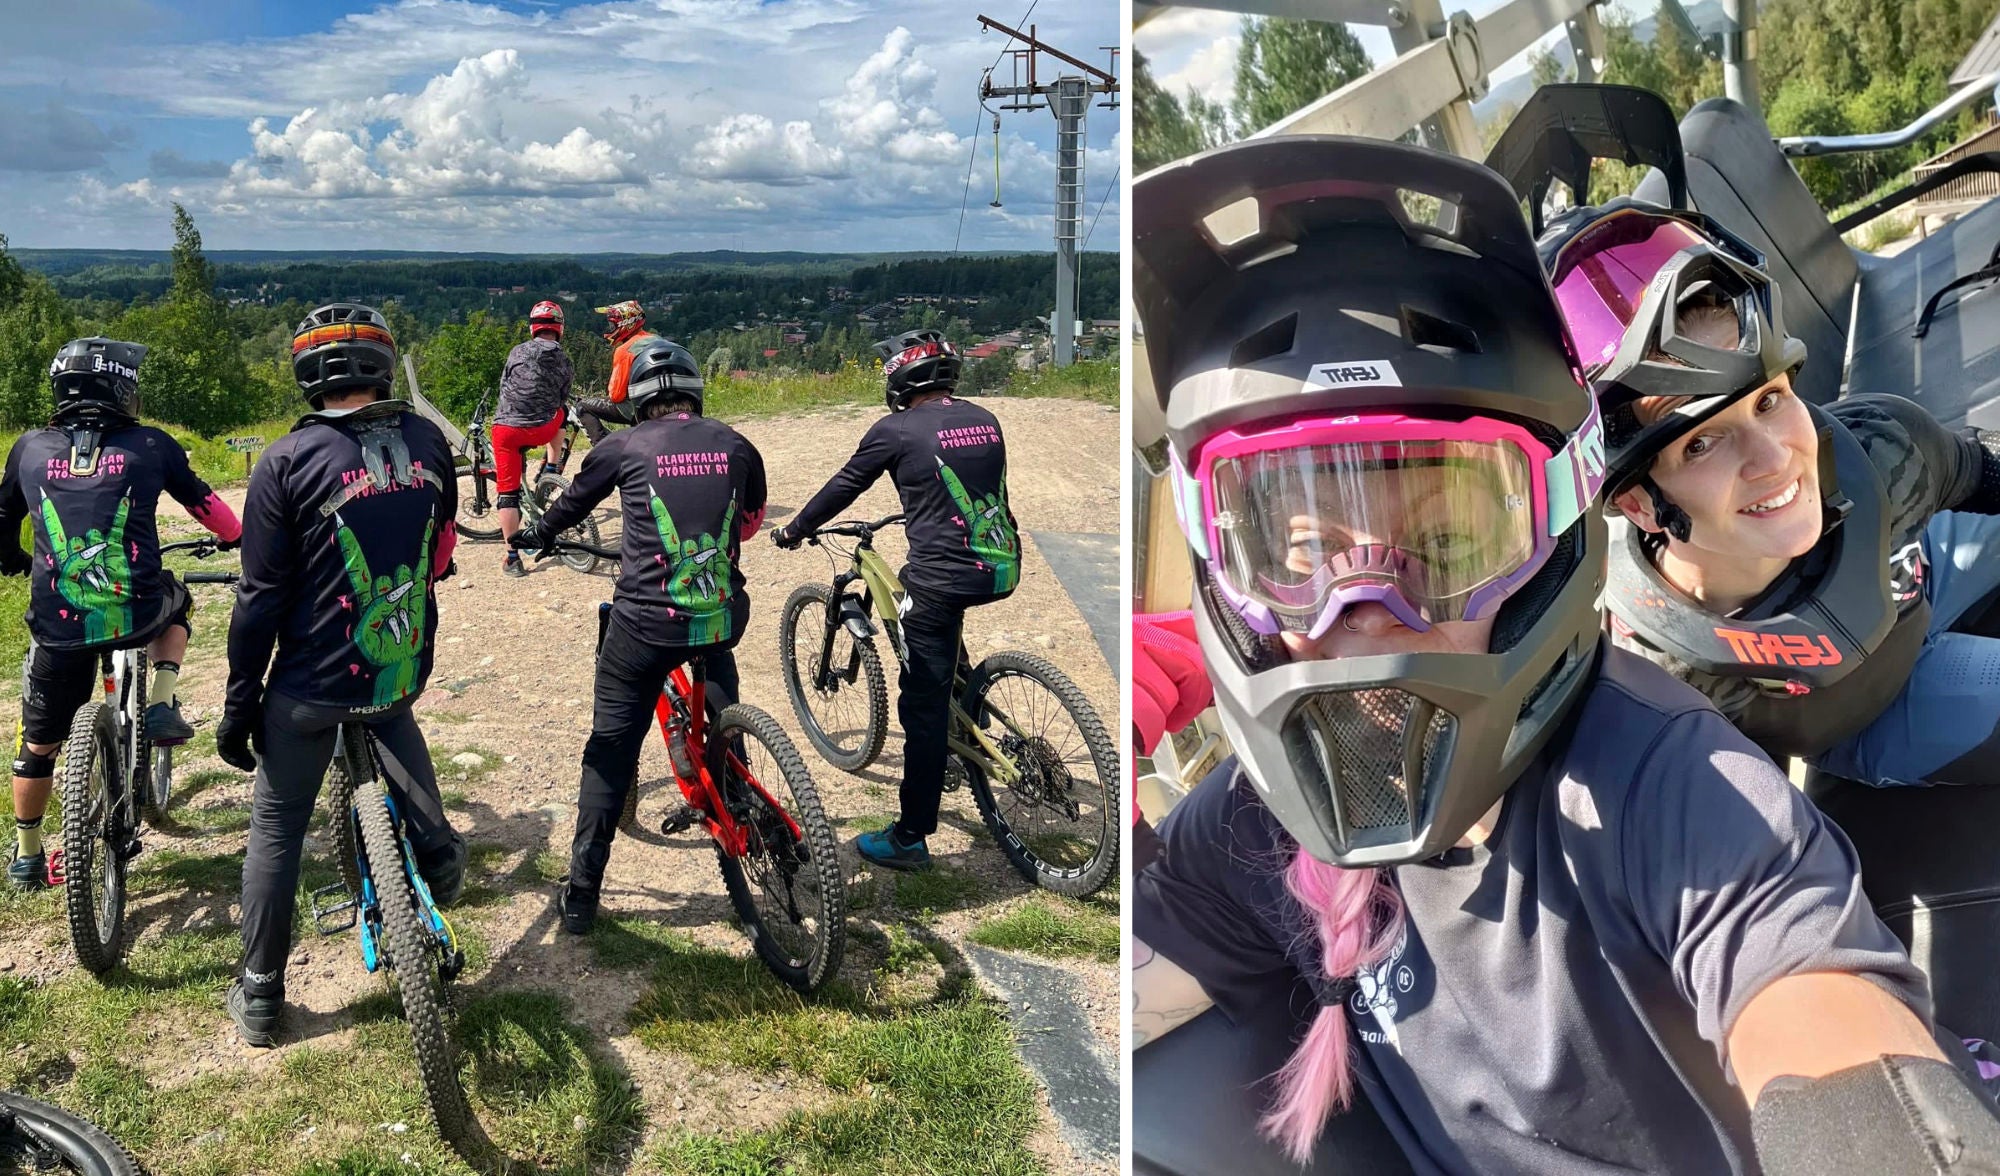 Alt text: Two images. The left image shows a group of DH athletes in their team jerseys on their bikes, surrounded by nature. The right image shows two bikers sitting in a ski lift. One of them is wearing a helmet and goggles, the other one has her helmet pushed up. She is smiling.